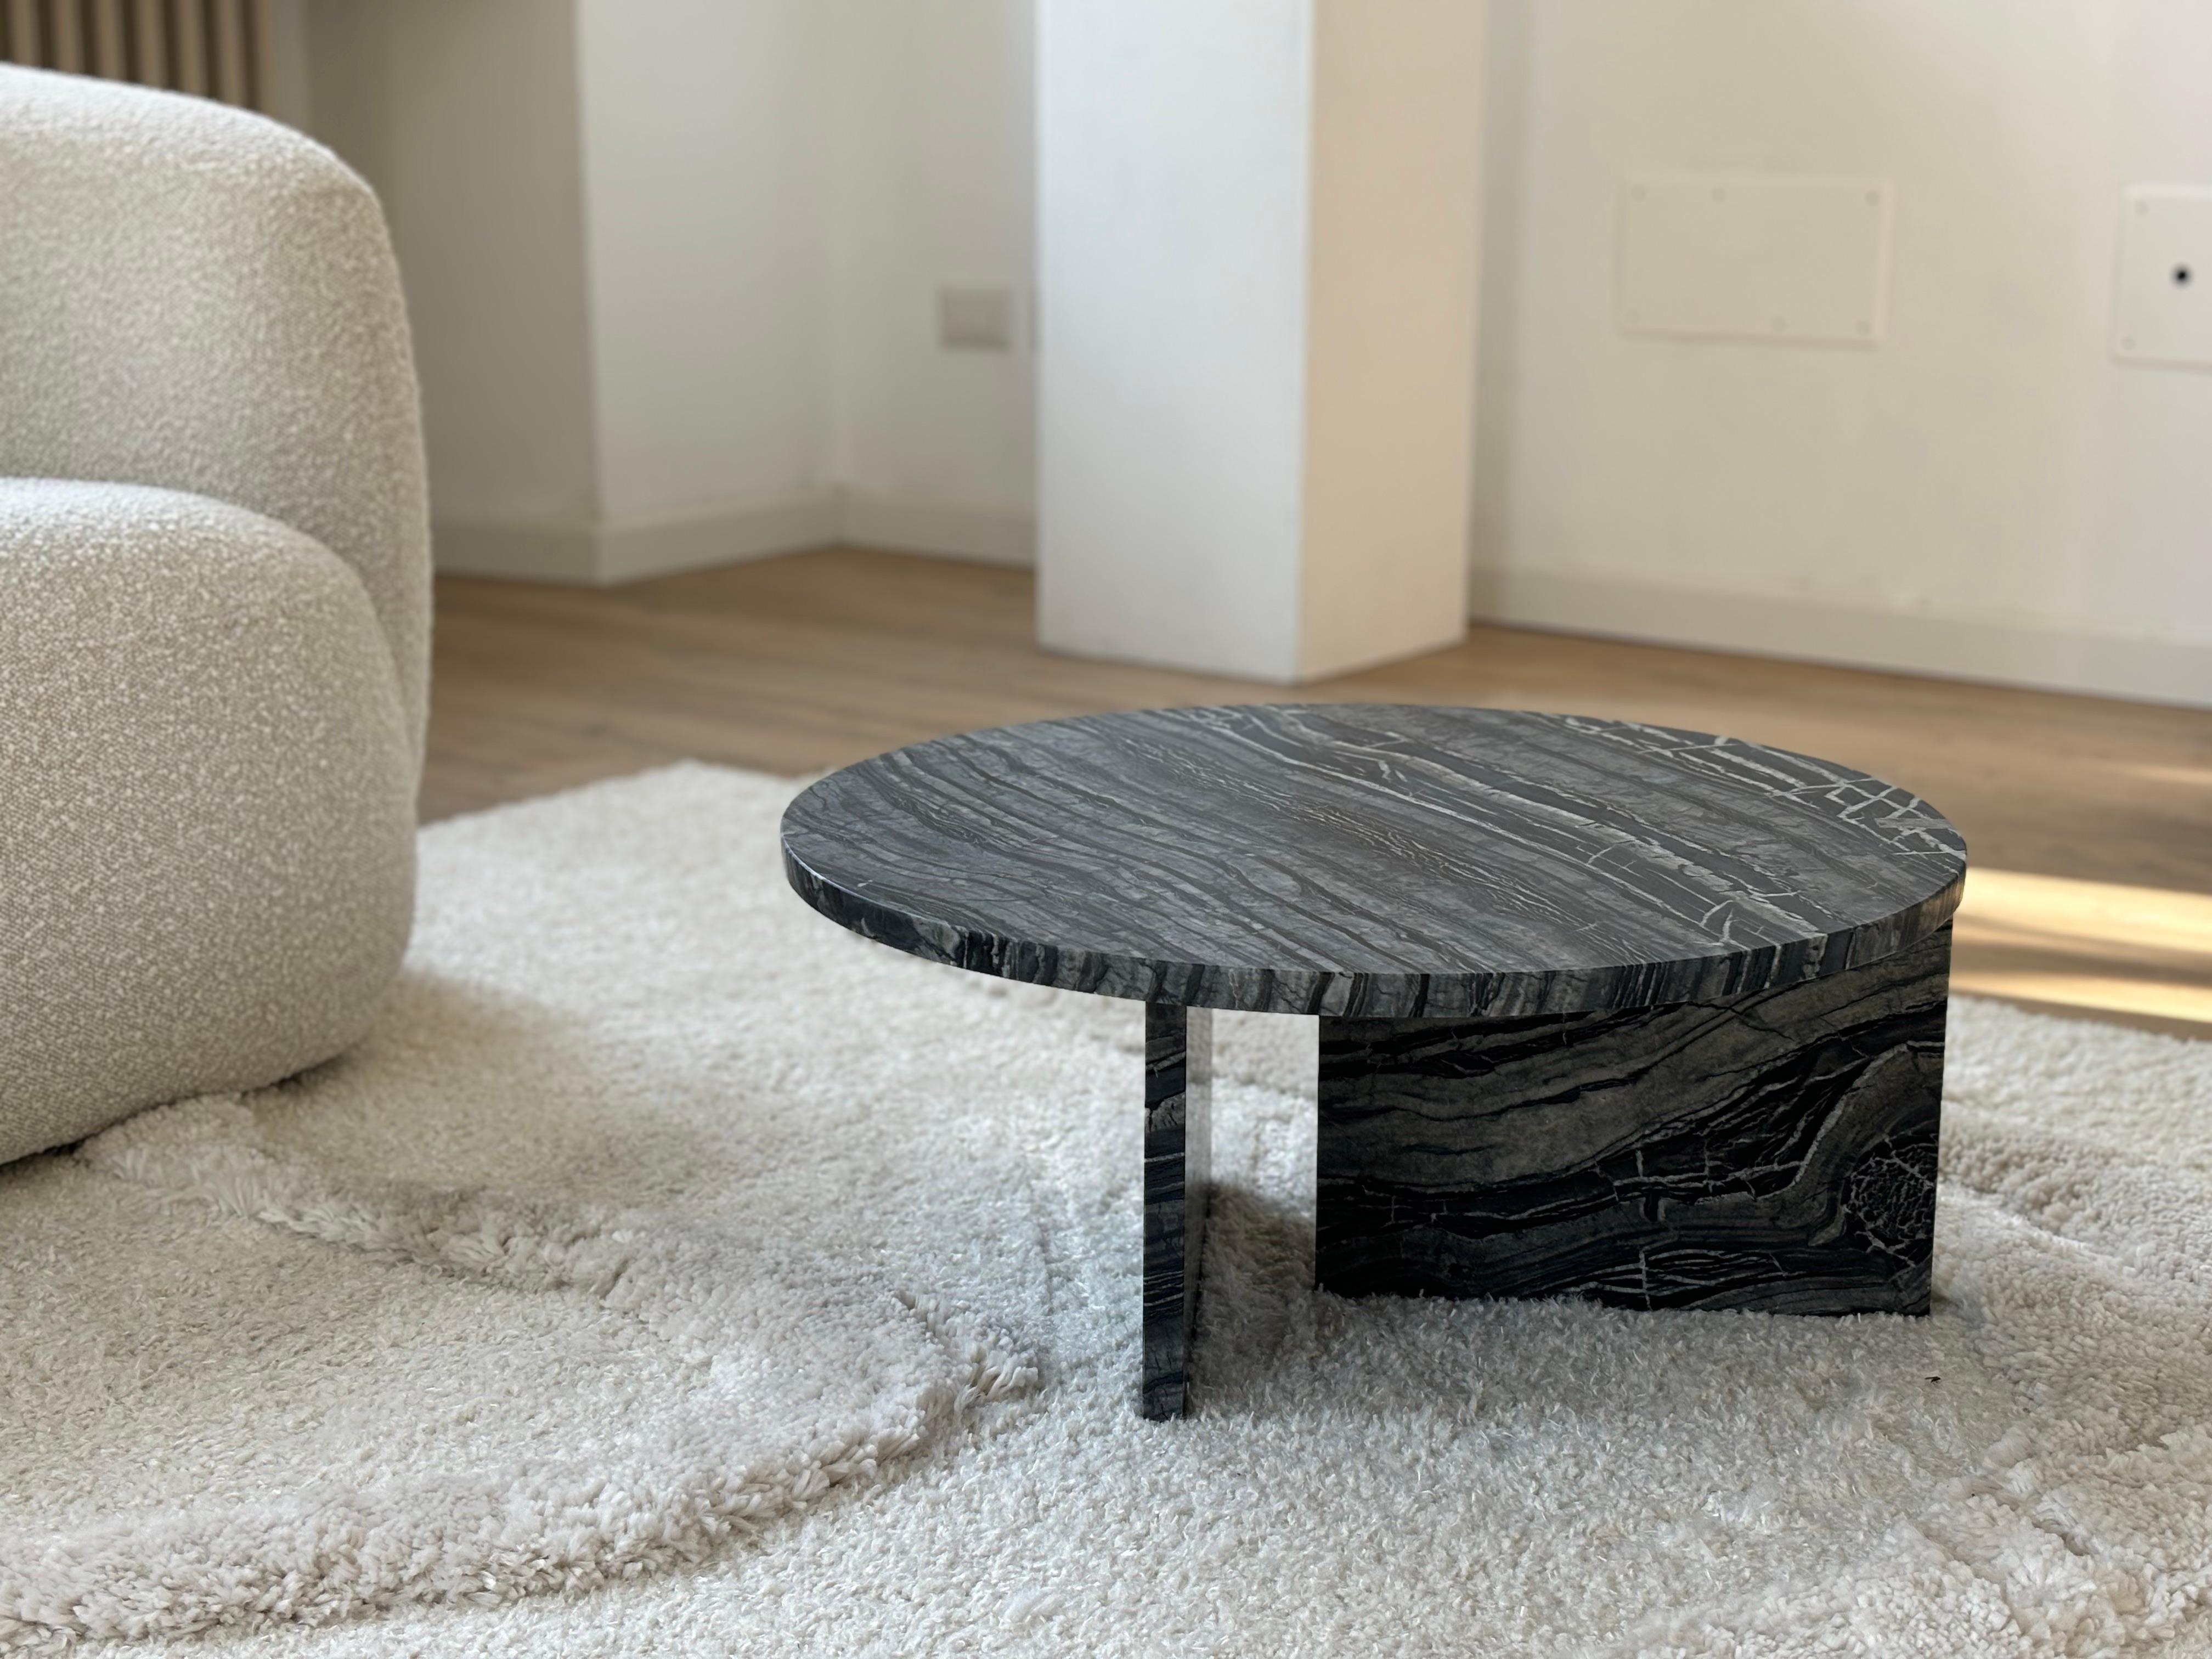 The Hashi coffee table is made entirely of precious Kenya black marble. 

The top is circular and 60 cm in diameter, the legs are made from two marble boards in which one part is inlaid on the top as a very elegant detail.
Artisanal production made